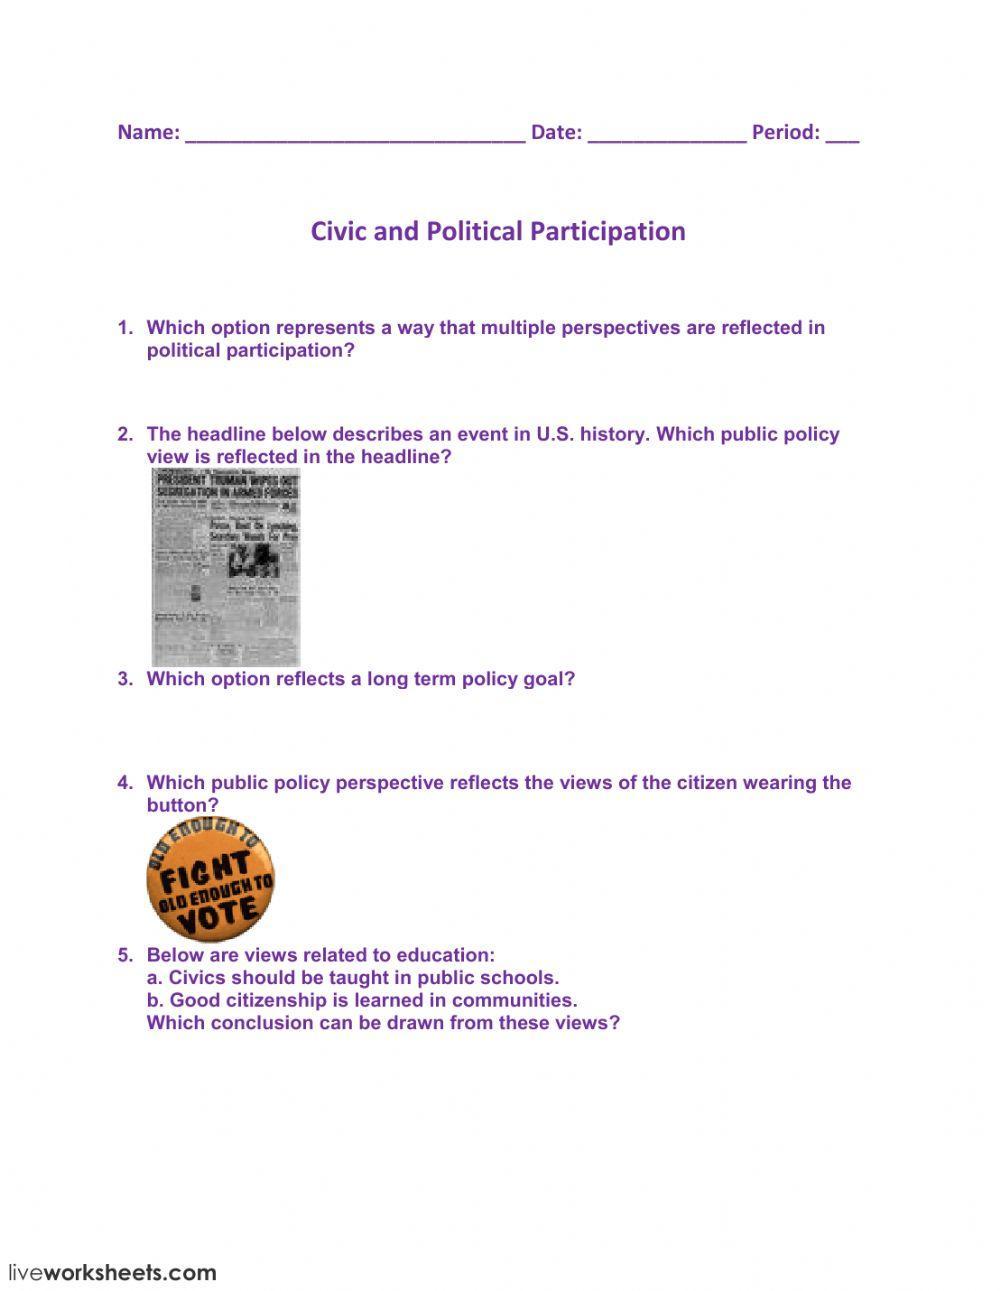 Civic and Political Participation